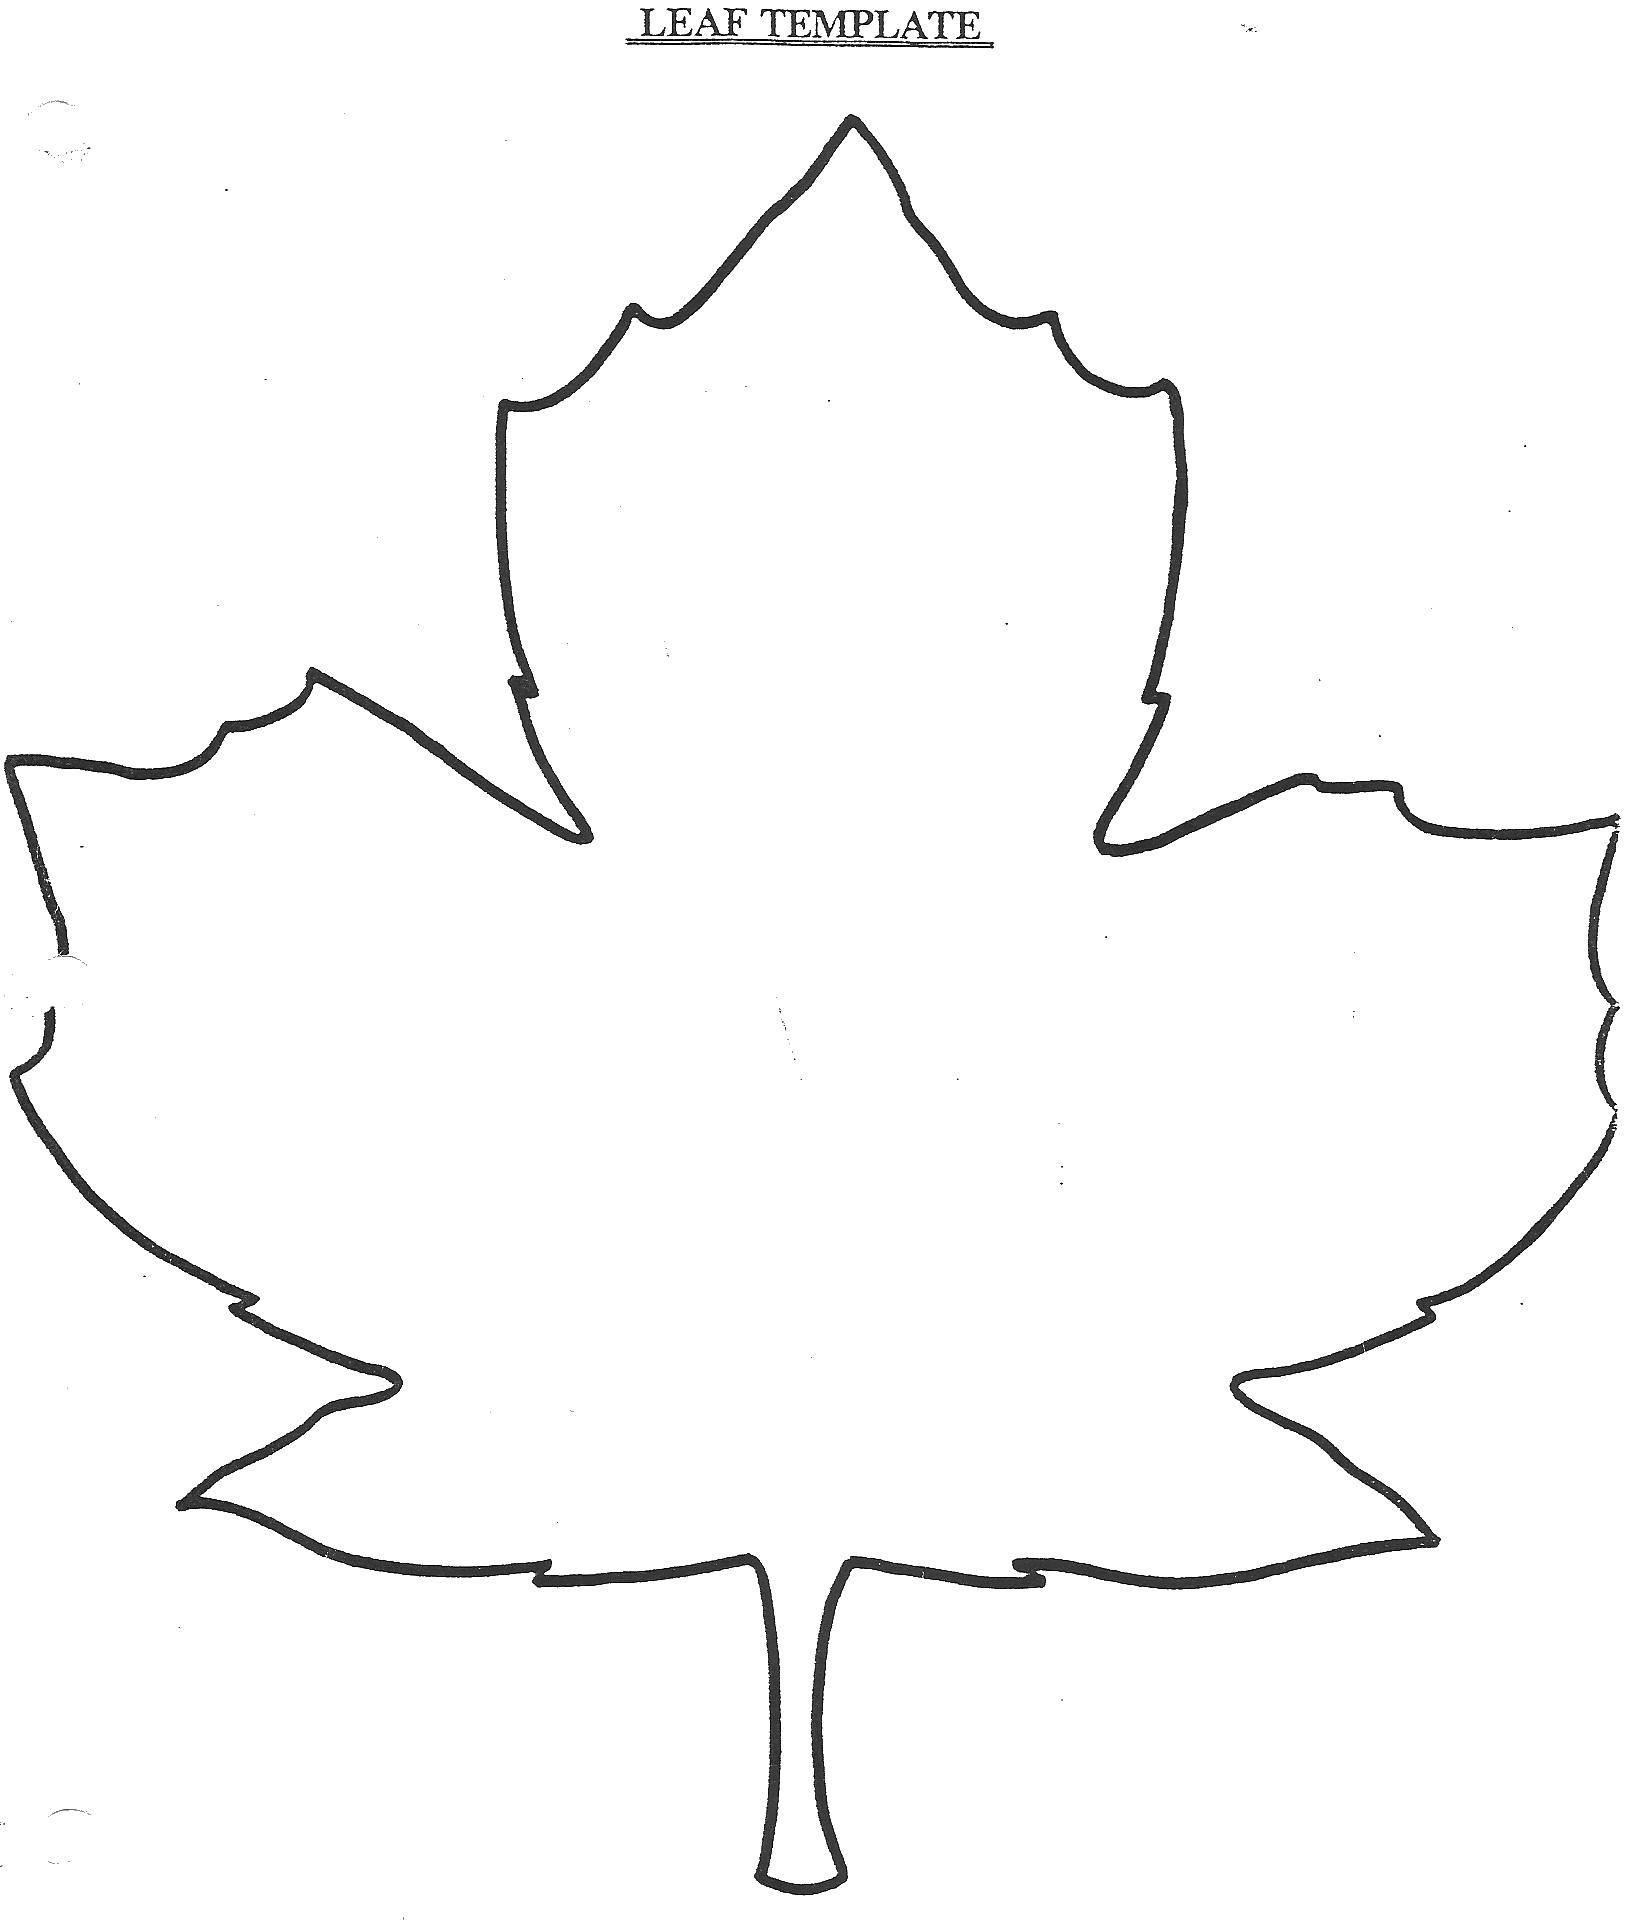 Coloring Sheet. Category The contours of the leaves of the trees. Tags:  the outline of the leaf, leaves.